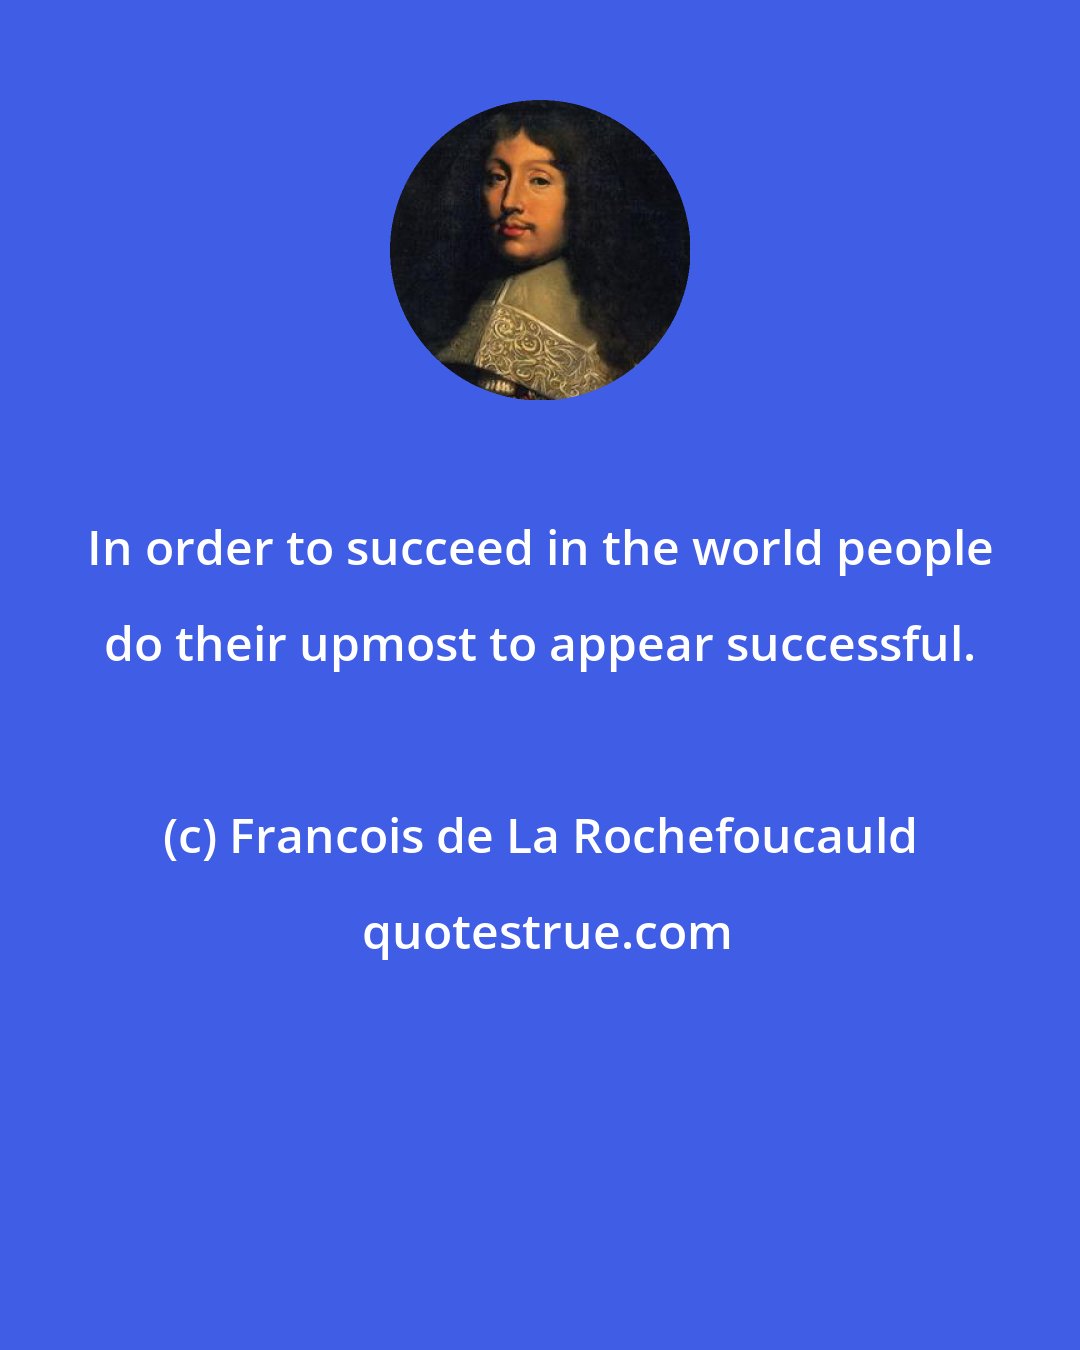 Francois de La Rochefoucauld: In order to succeed in the world people do their upmost to appear successful.